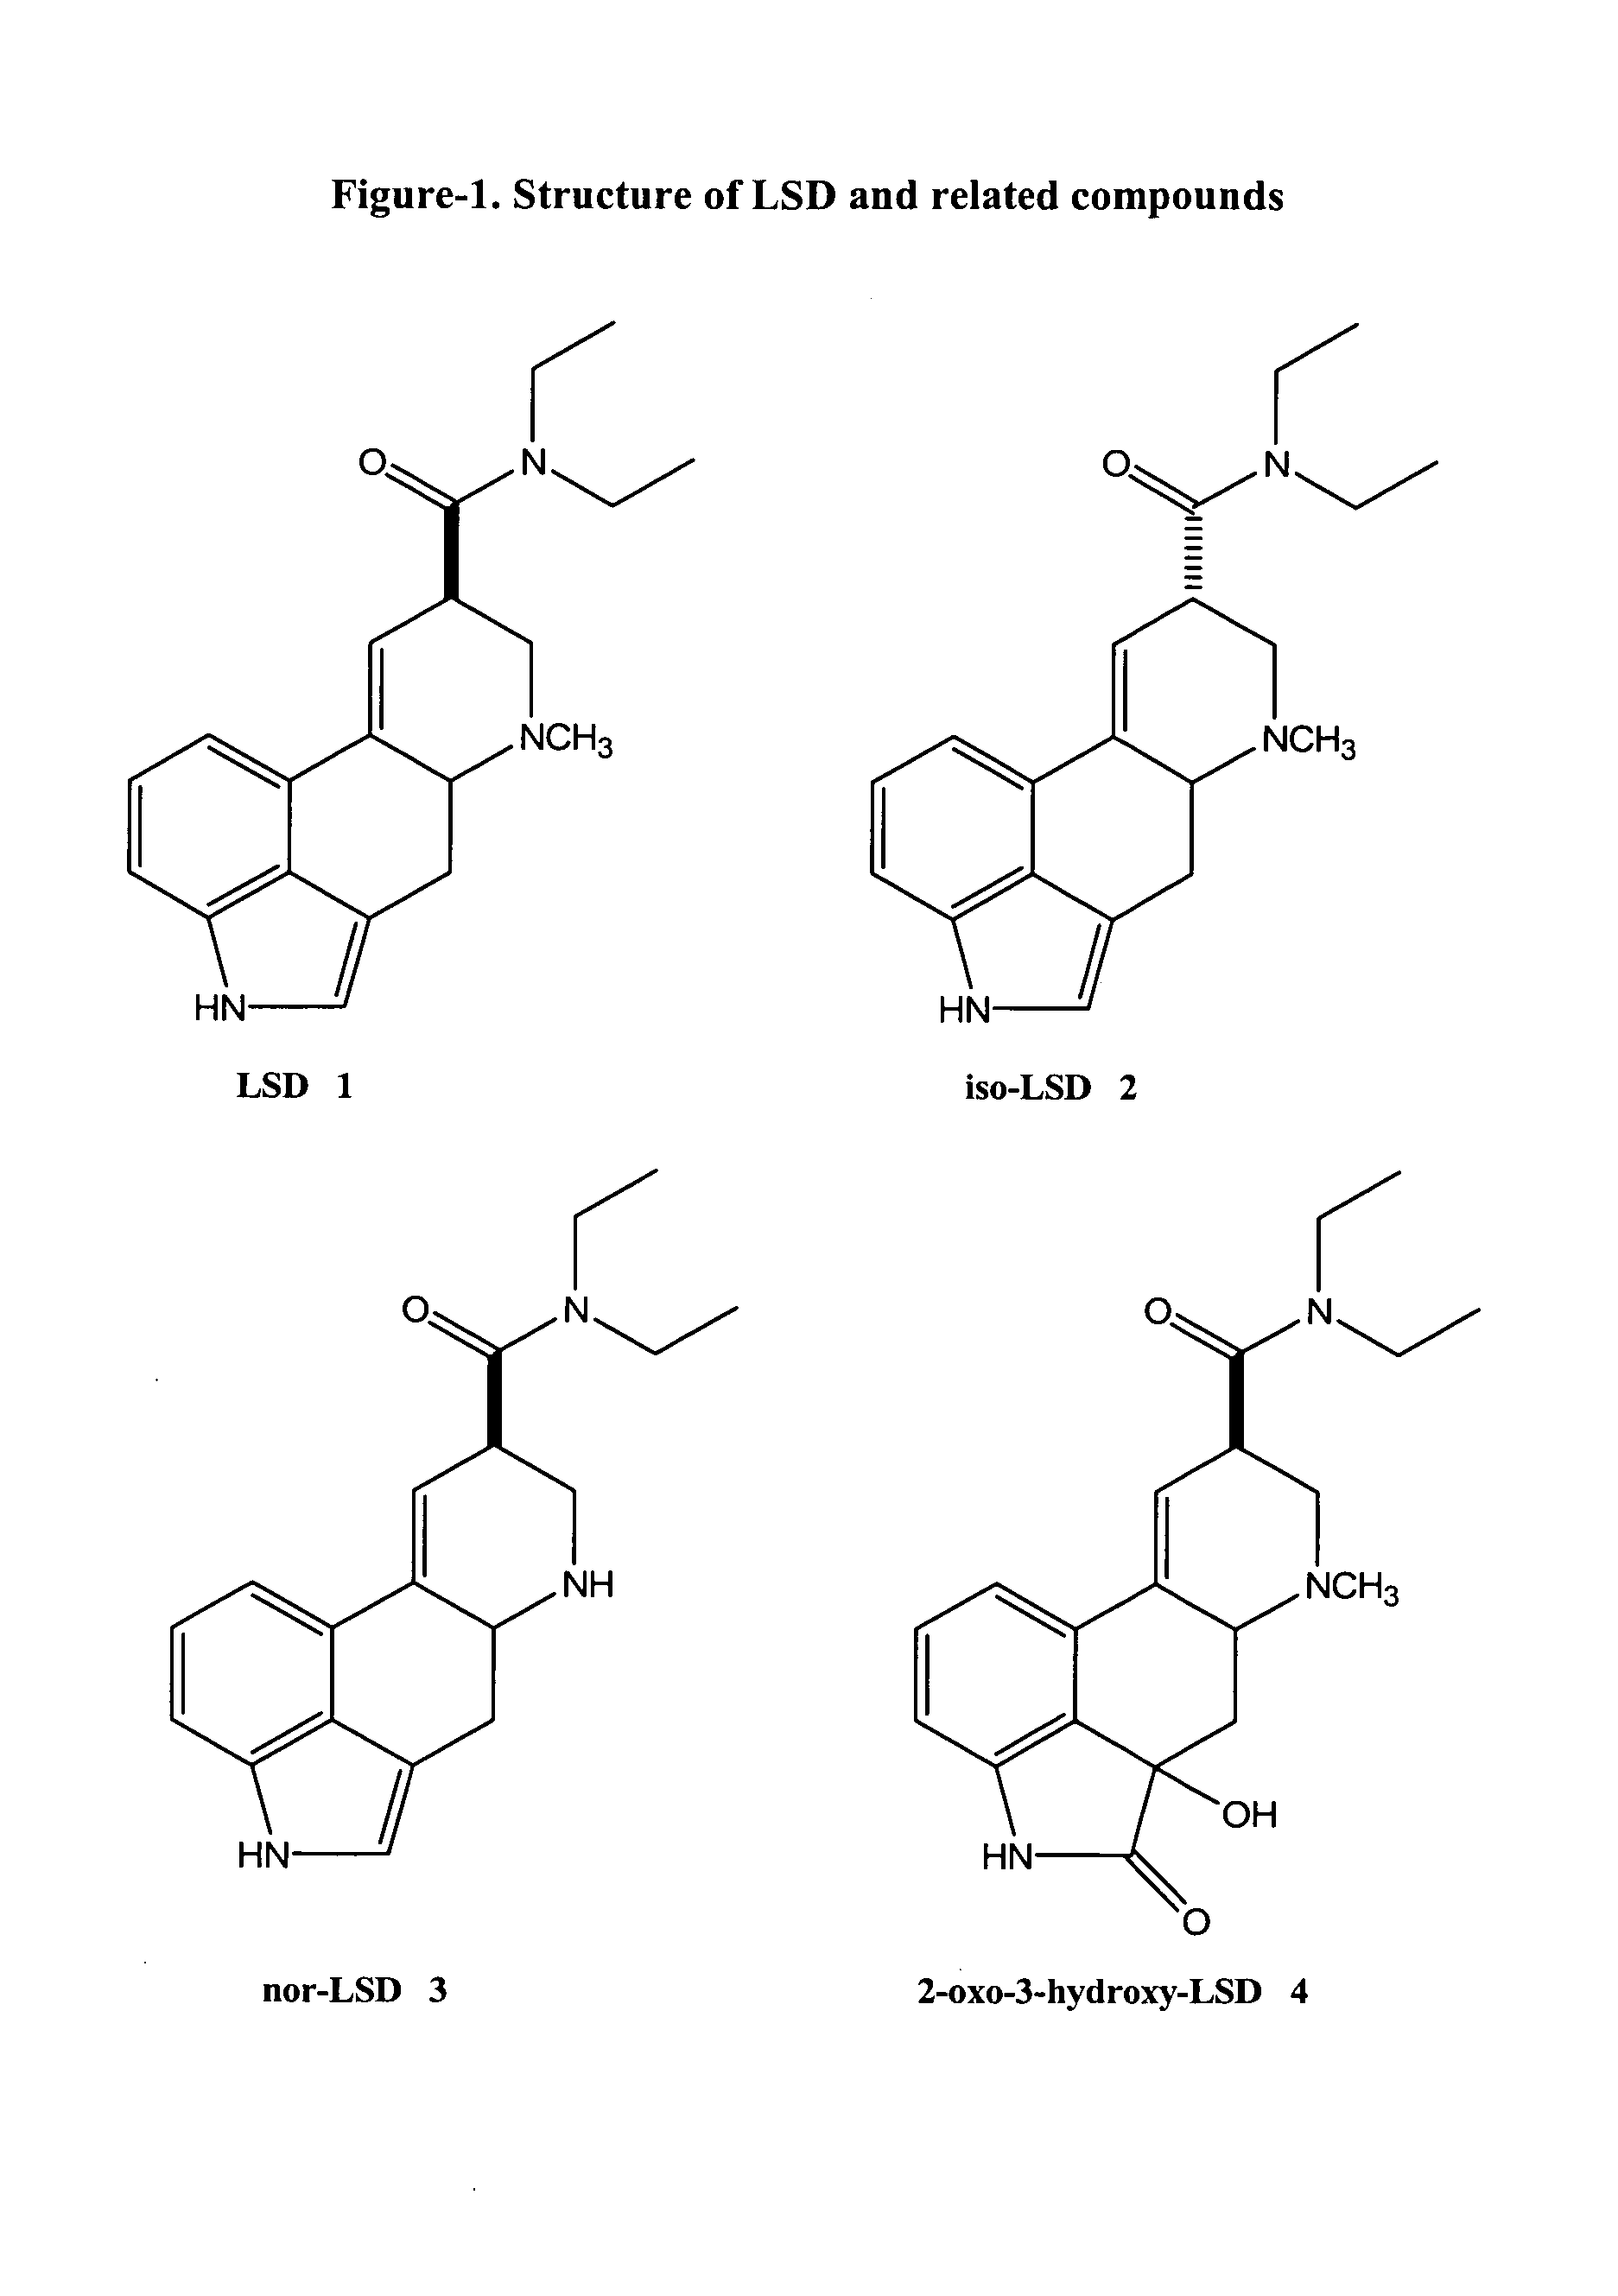 Haptens, immunogens, antibodies and conjugates to 2-oxo-3-hydroxy-LSD